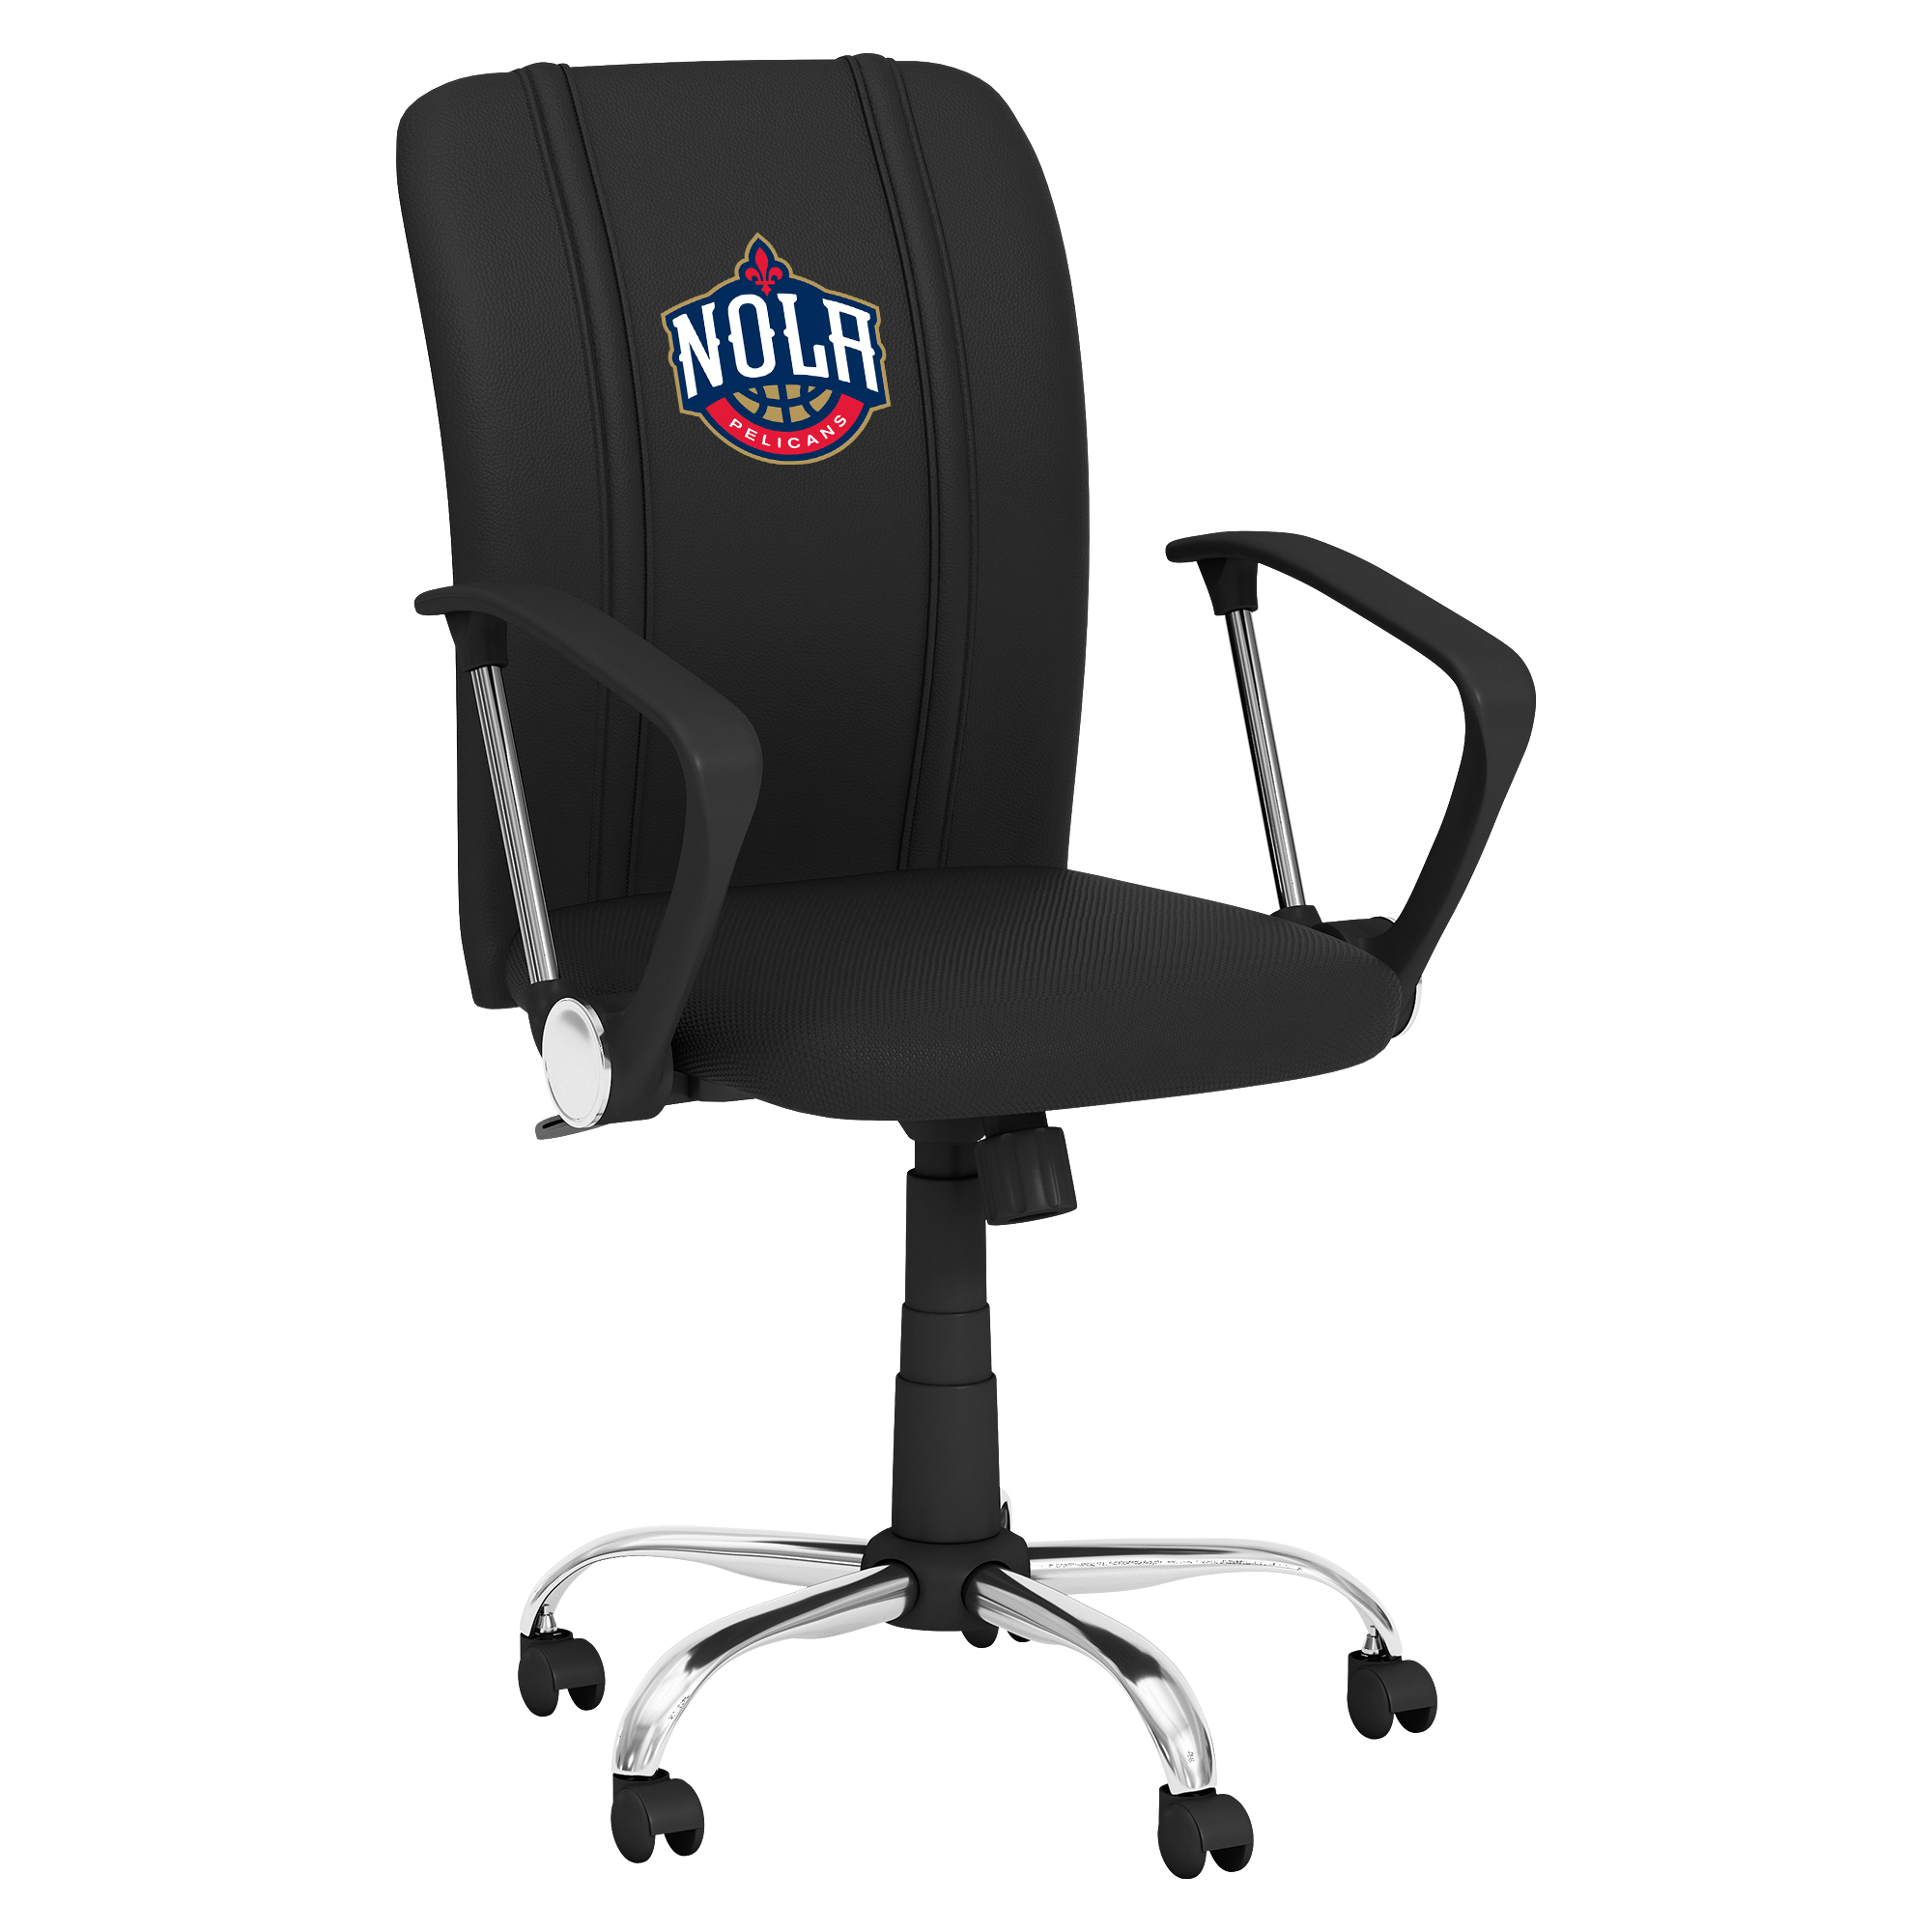 New Orleans Pelicans Curve Task Chair with New Orleans Pelicans NOLA